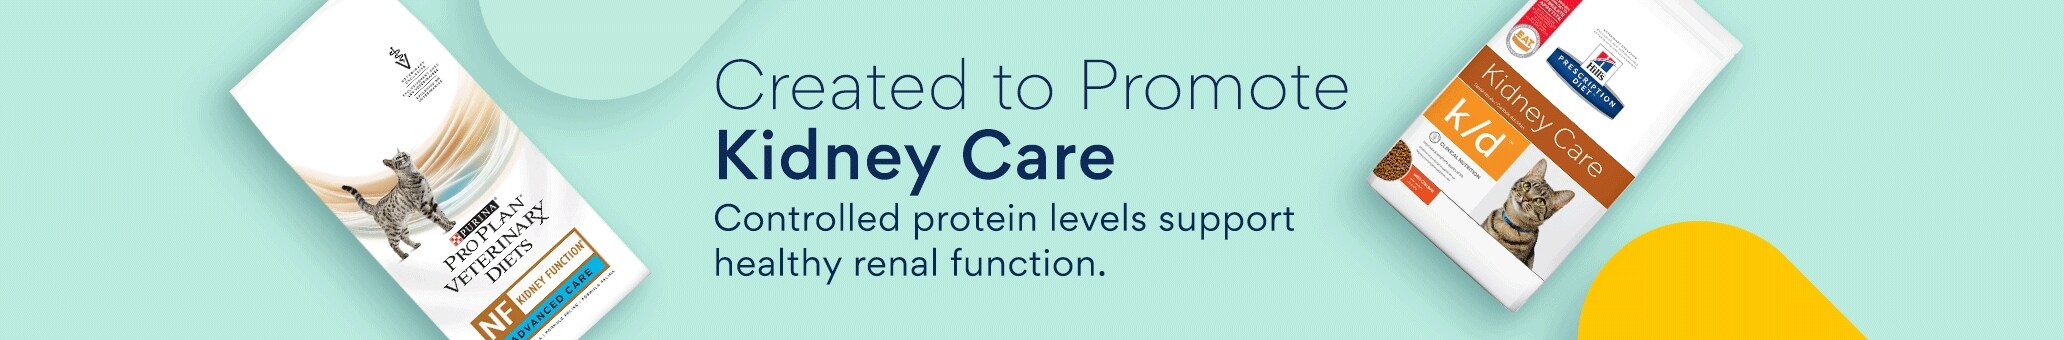 Created to Promote Kidney Care. Controlled protein levels support healthy renal function.